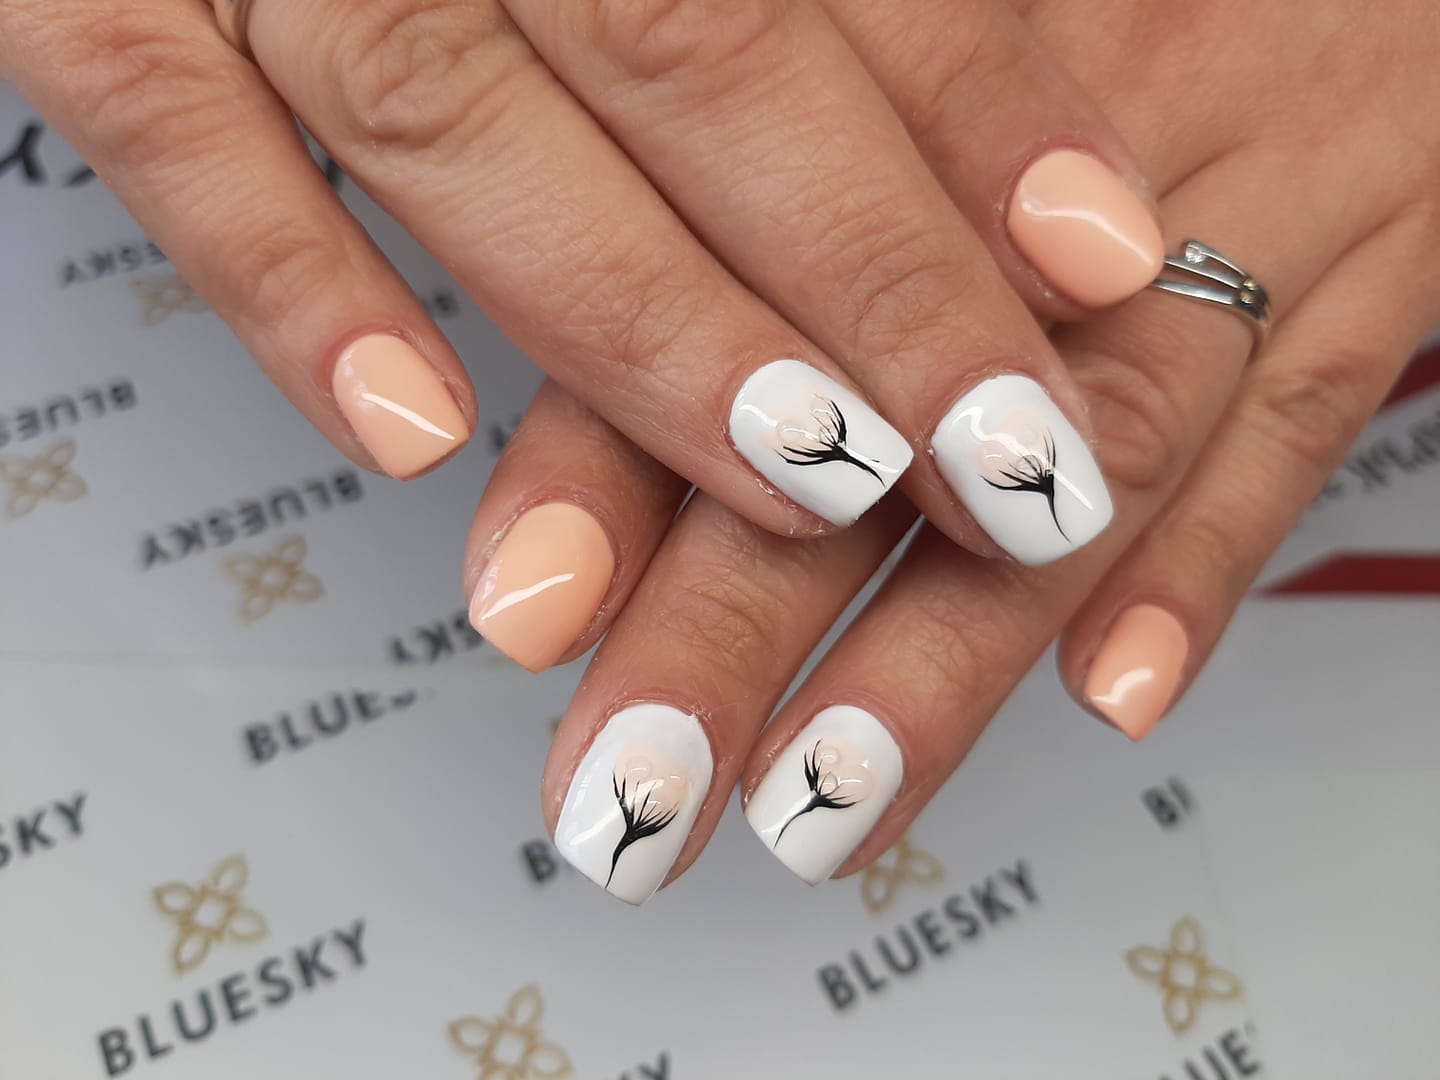 8. SNS Nail Art Trends - wide 4